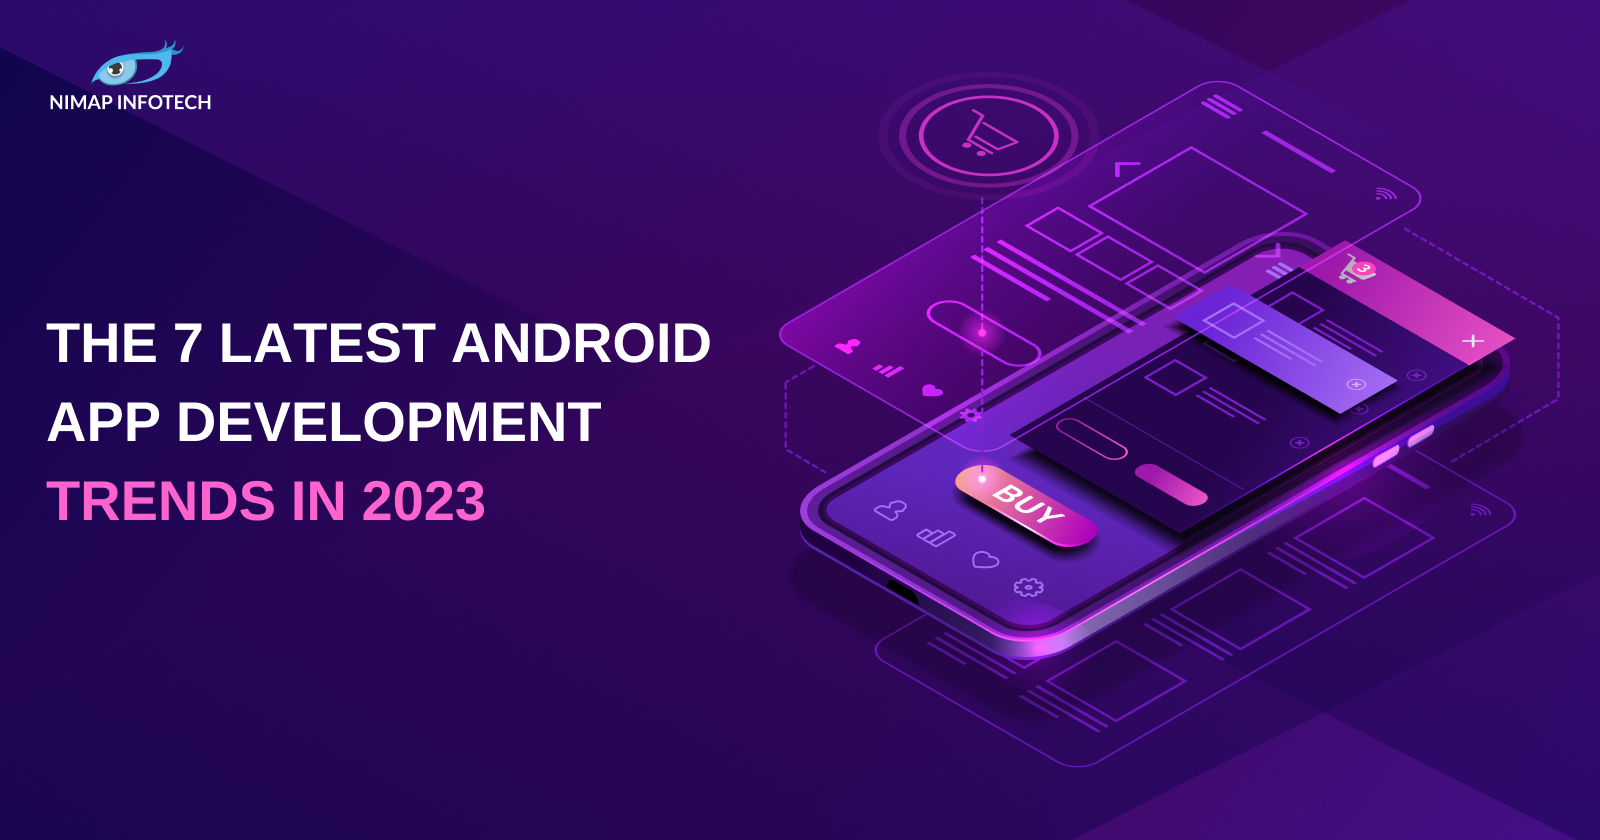 The 7 Latest Android App Development Trends in 2023